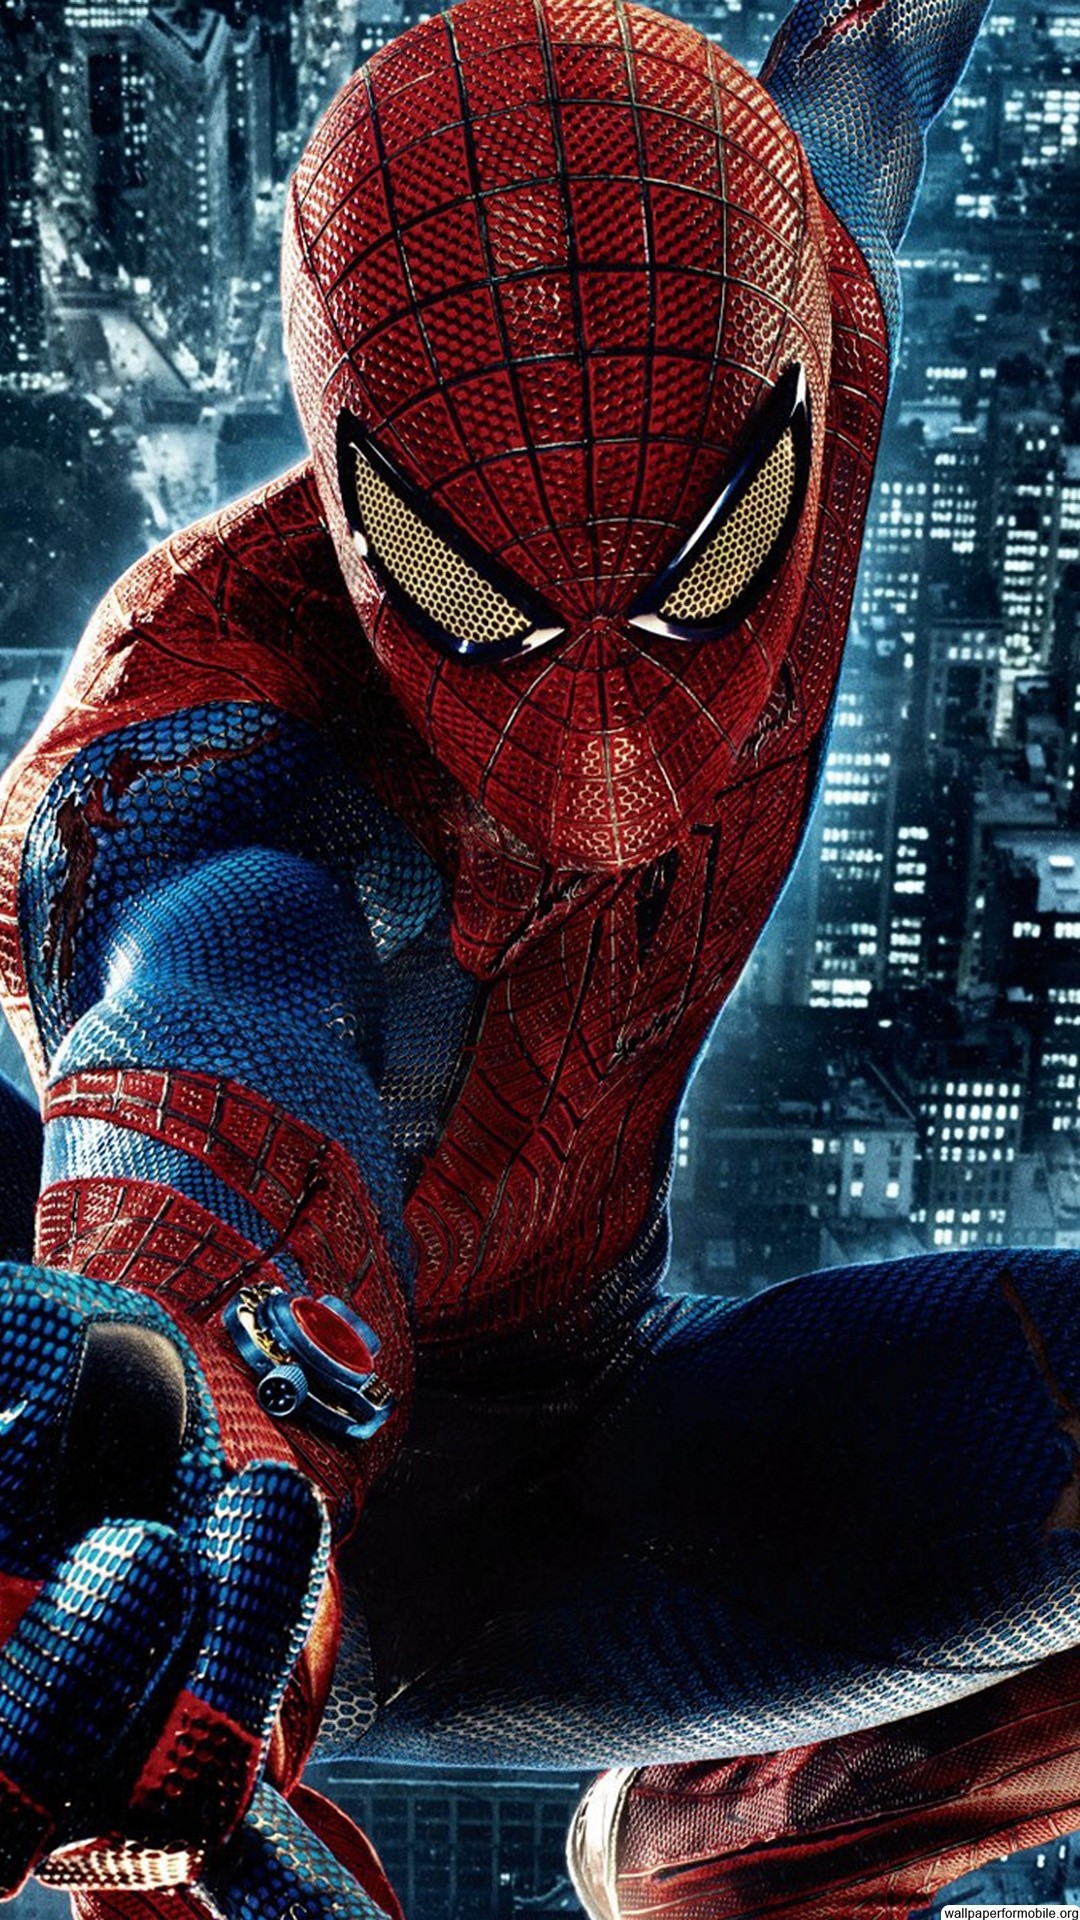 1080x1920 wallpaper.wiki-Awesome-Spiderman-Image-for-Iphone-PIC-